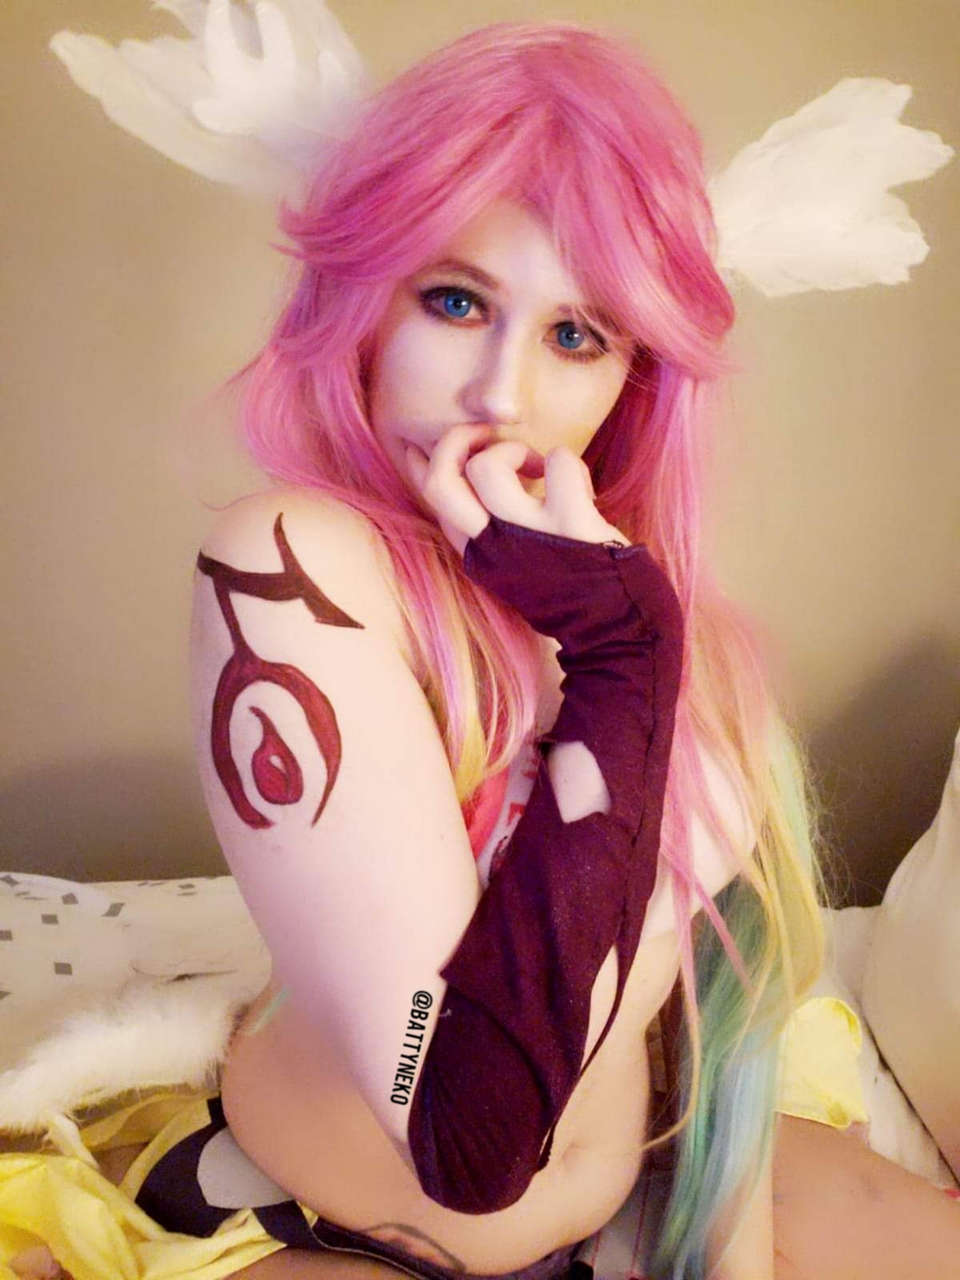 Jibril Cosplay From No Game No Life By Battynek